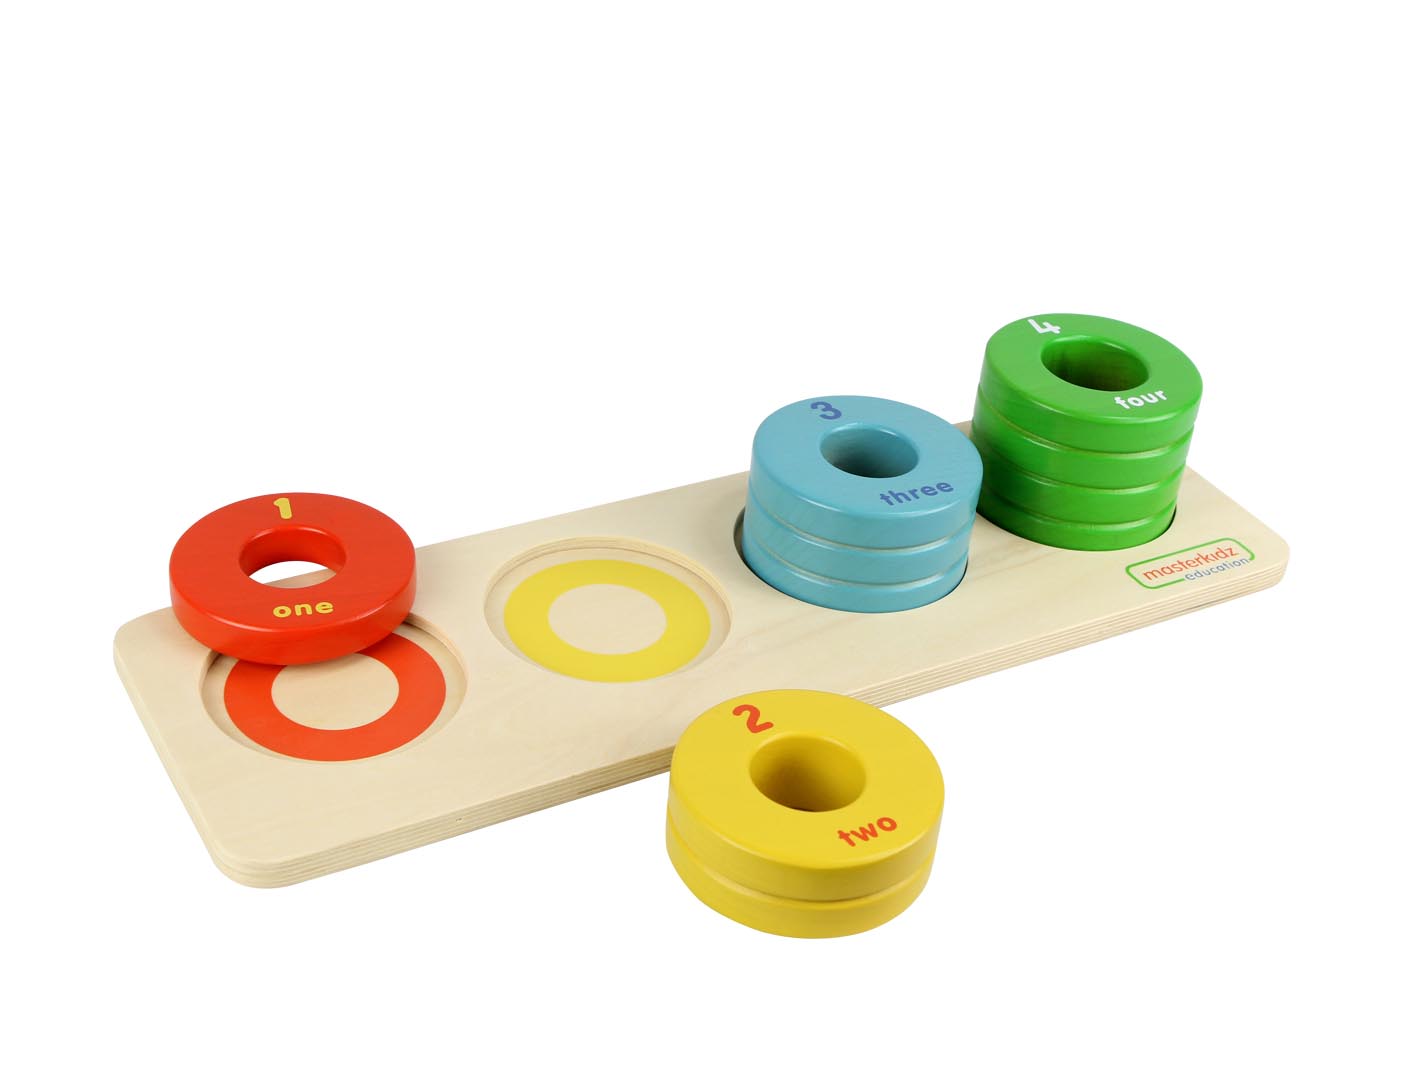 Bethd wood size concept learning board toys1